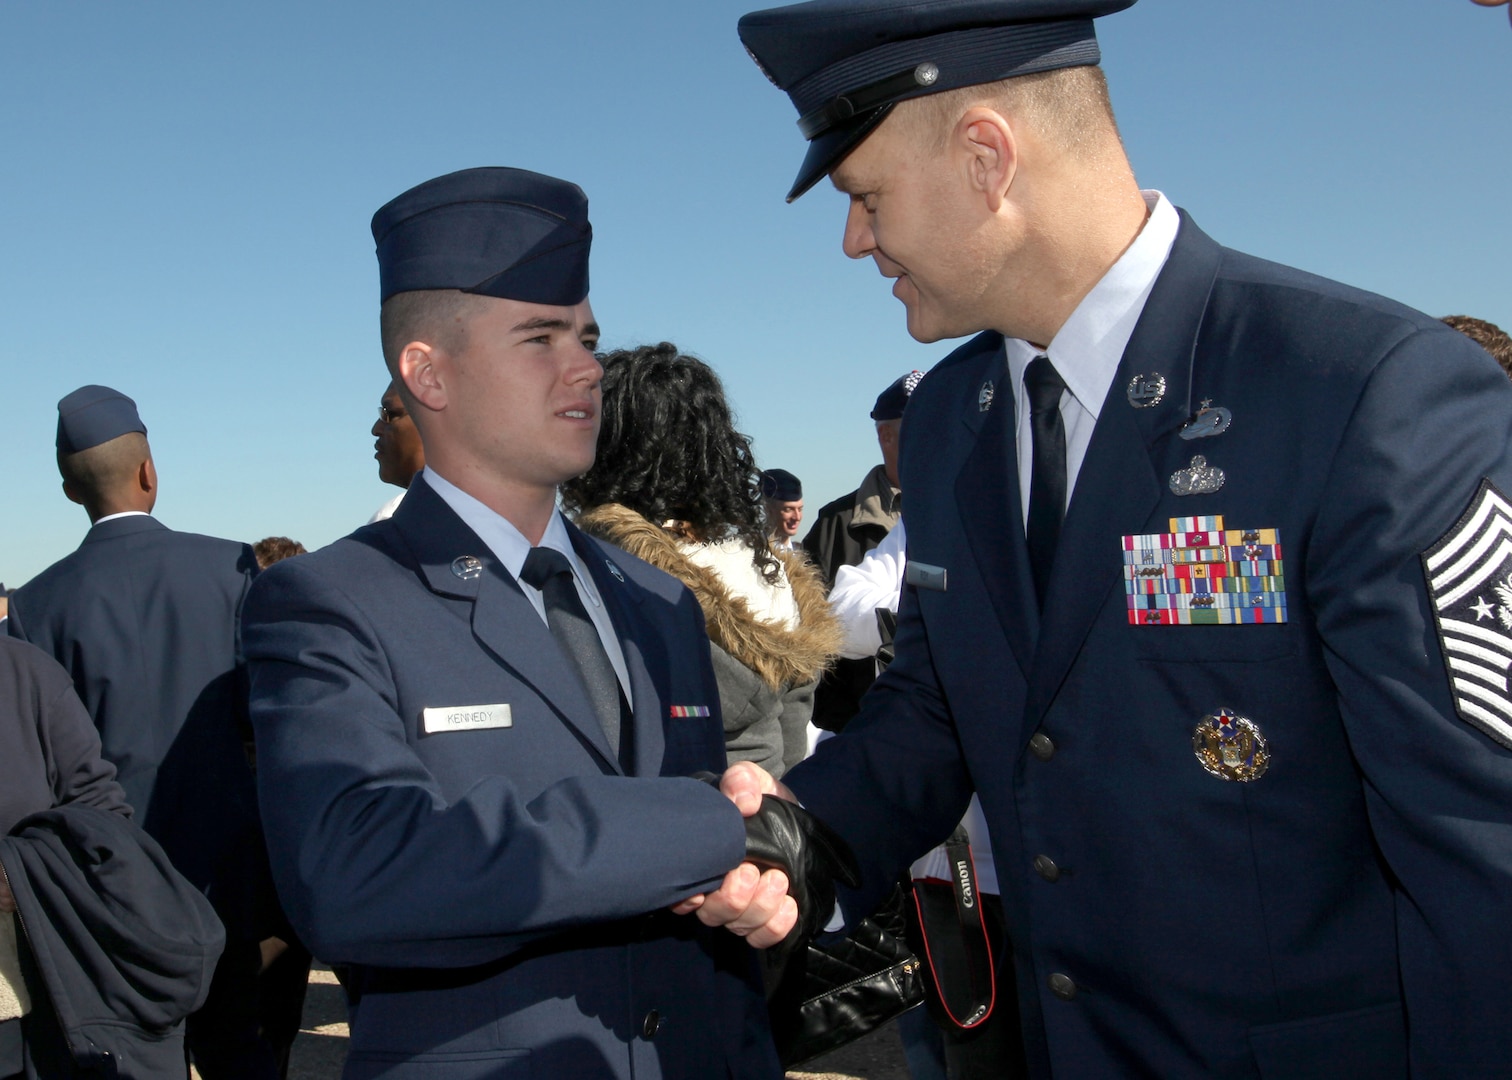 Chief Master Sgt. of the Air Force James A. Roy shakes hands with Airman Jonathon Kennedy after the Air Force Basic Military Training graduation Nov. 19. During his trip to Lackland, Chief Roy visited the 344th Training Squadron, had lunch with military training leaders and spoke to students at the Robert D. Gaylor NCO Academy. (U.S. Air Force photo/Robbin Cresswell)